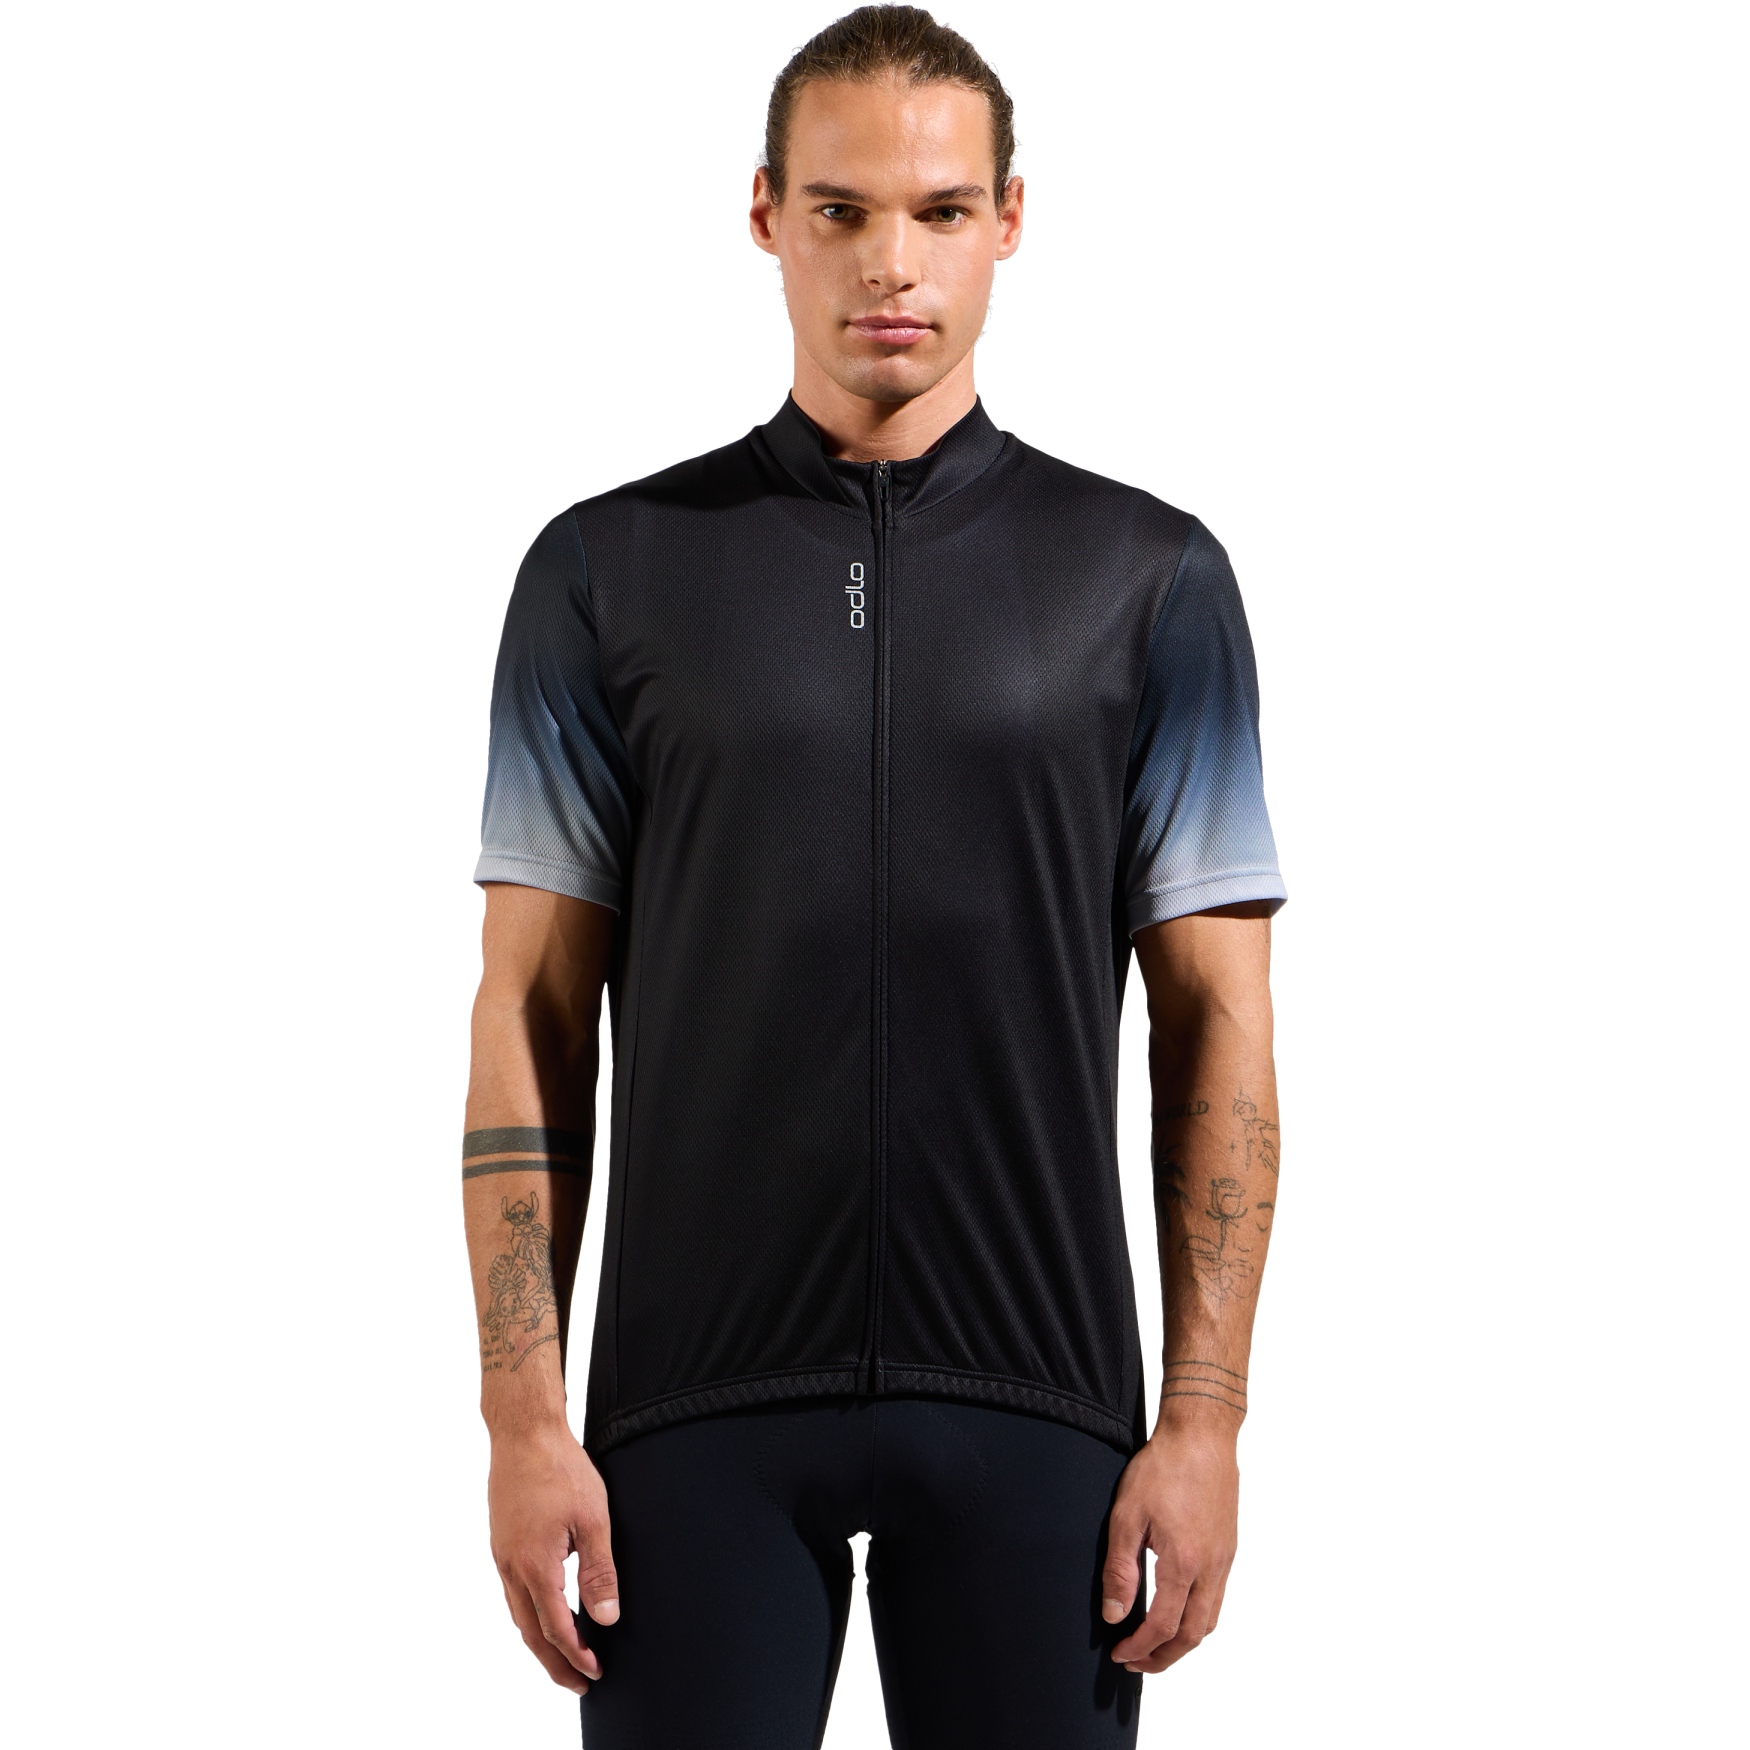 Picture of Odlo Essentials Short Sleeve Cycling Jersey Men - black